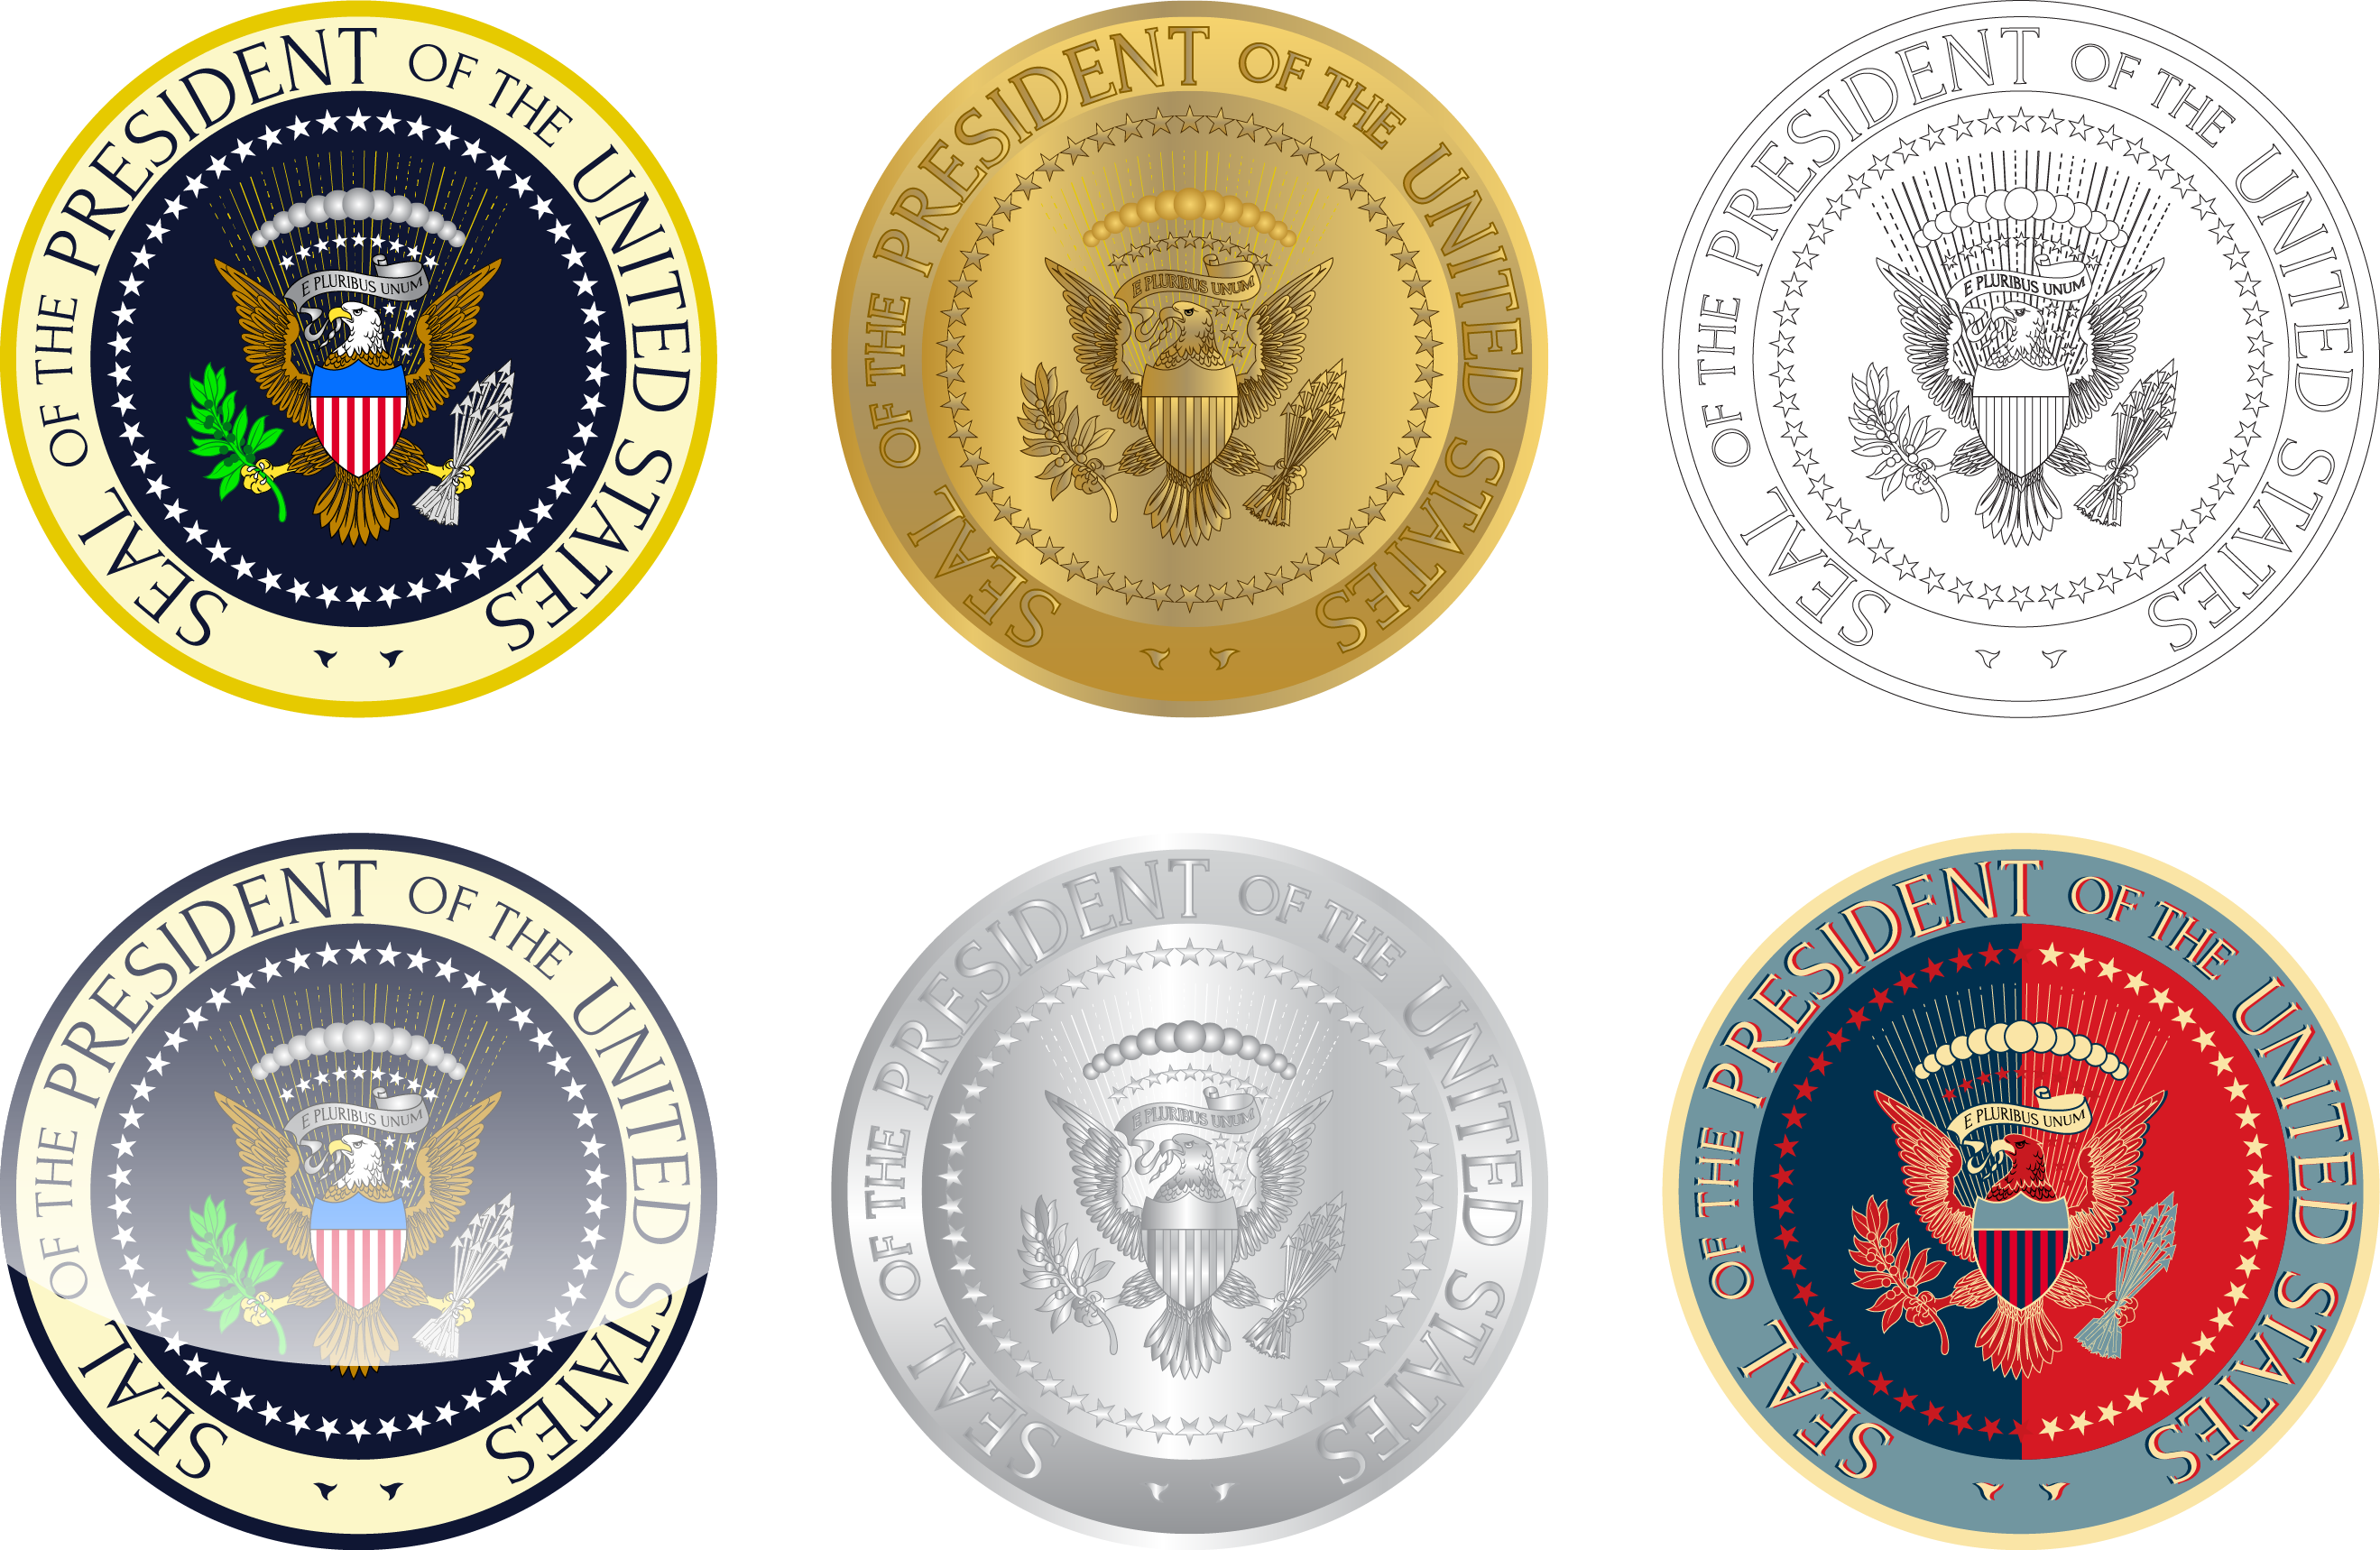 Seal Of The President Of The United States Coin Logo - President Of The United States (2638x1718)